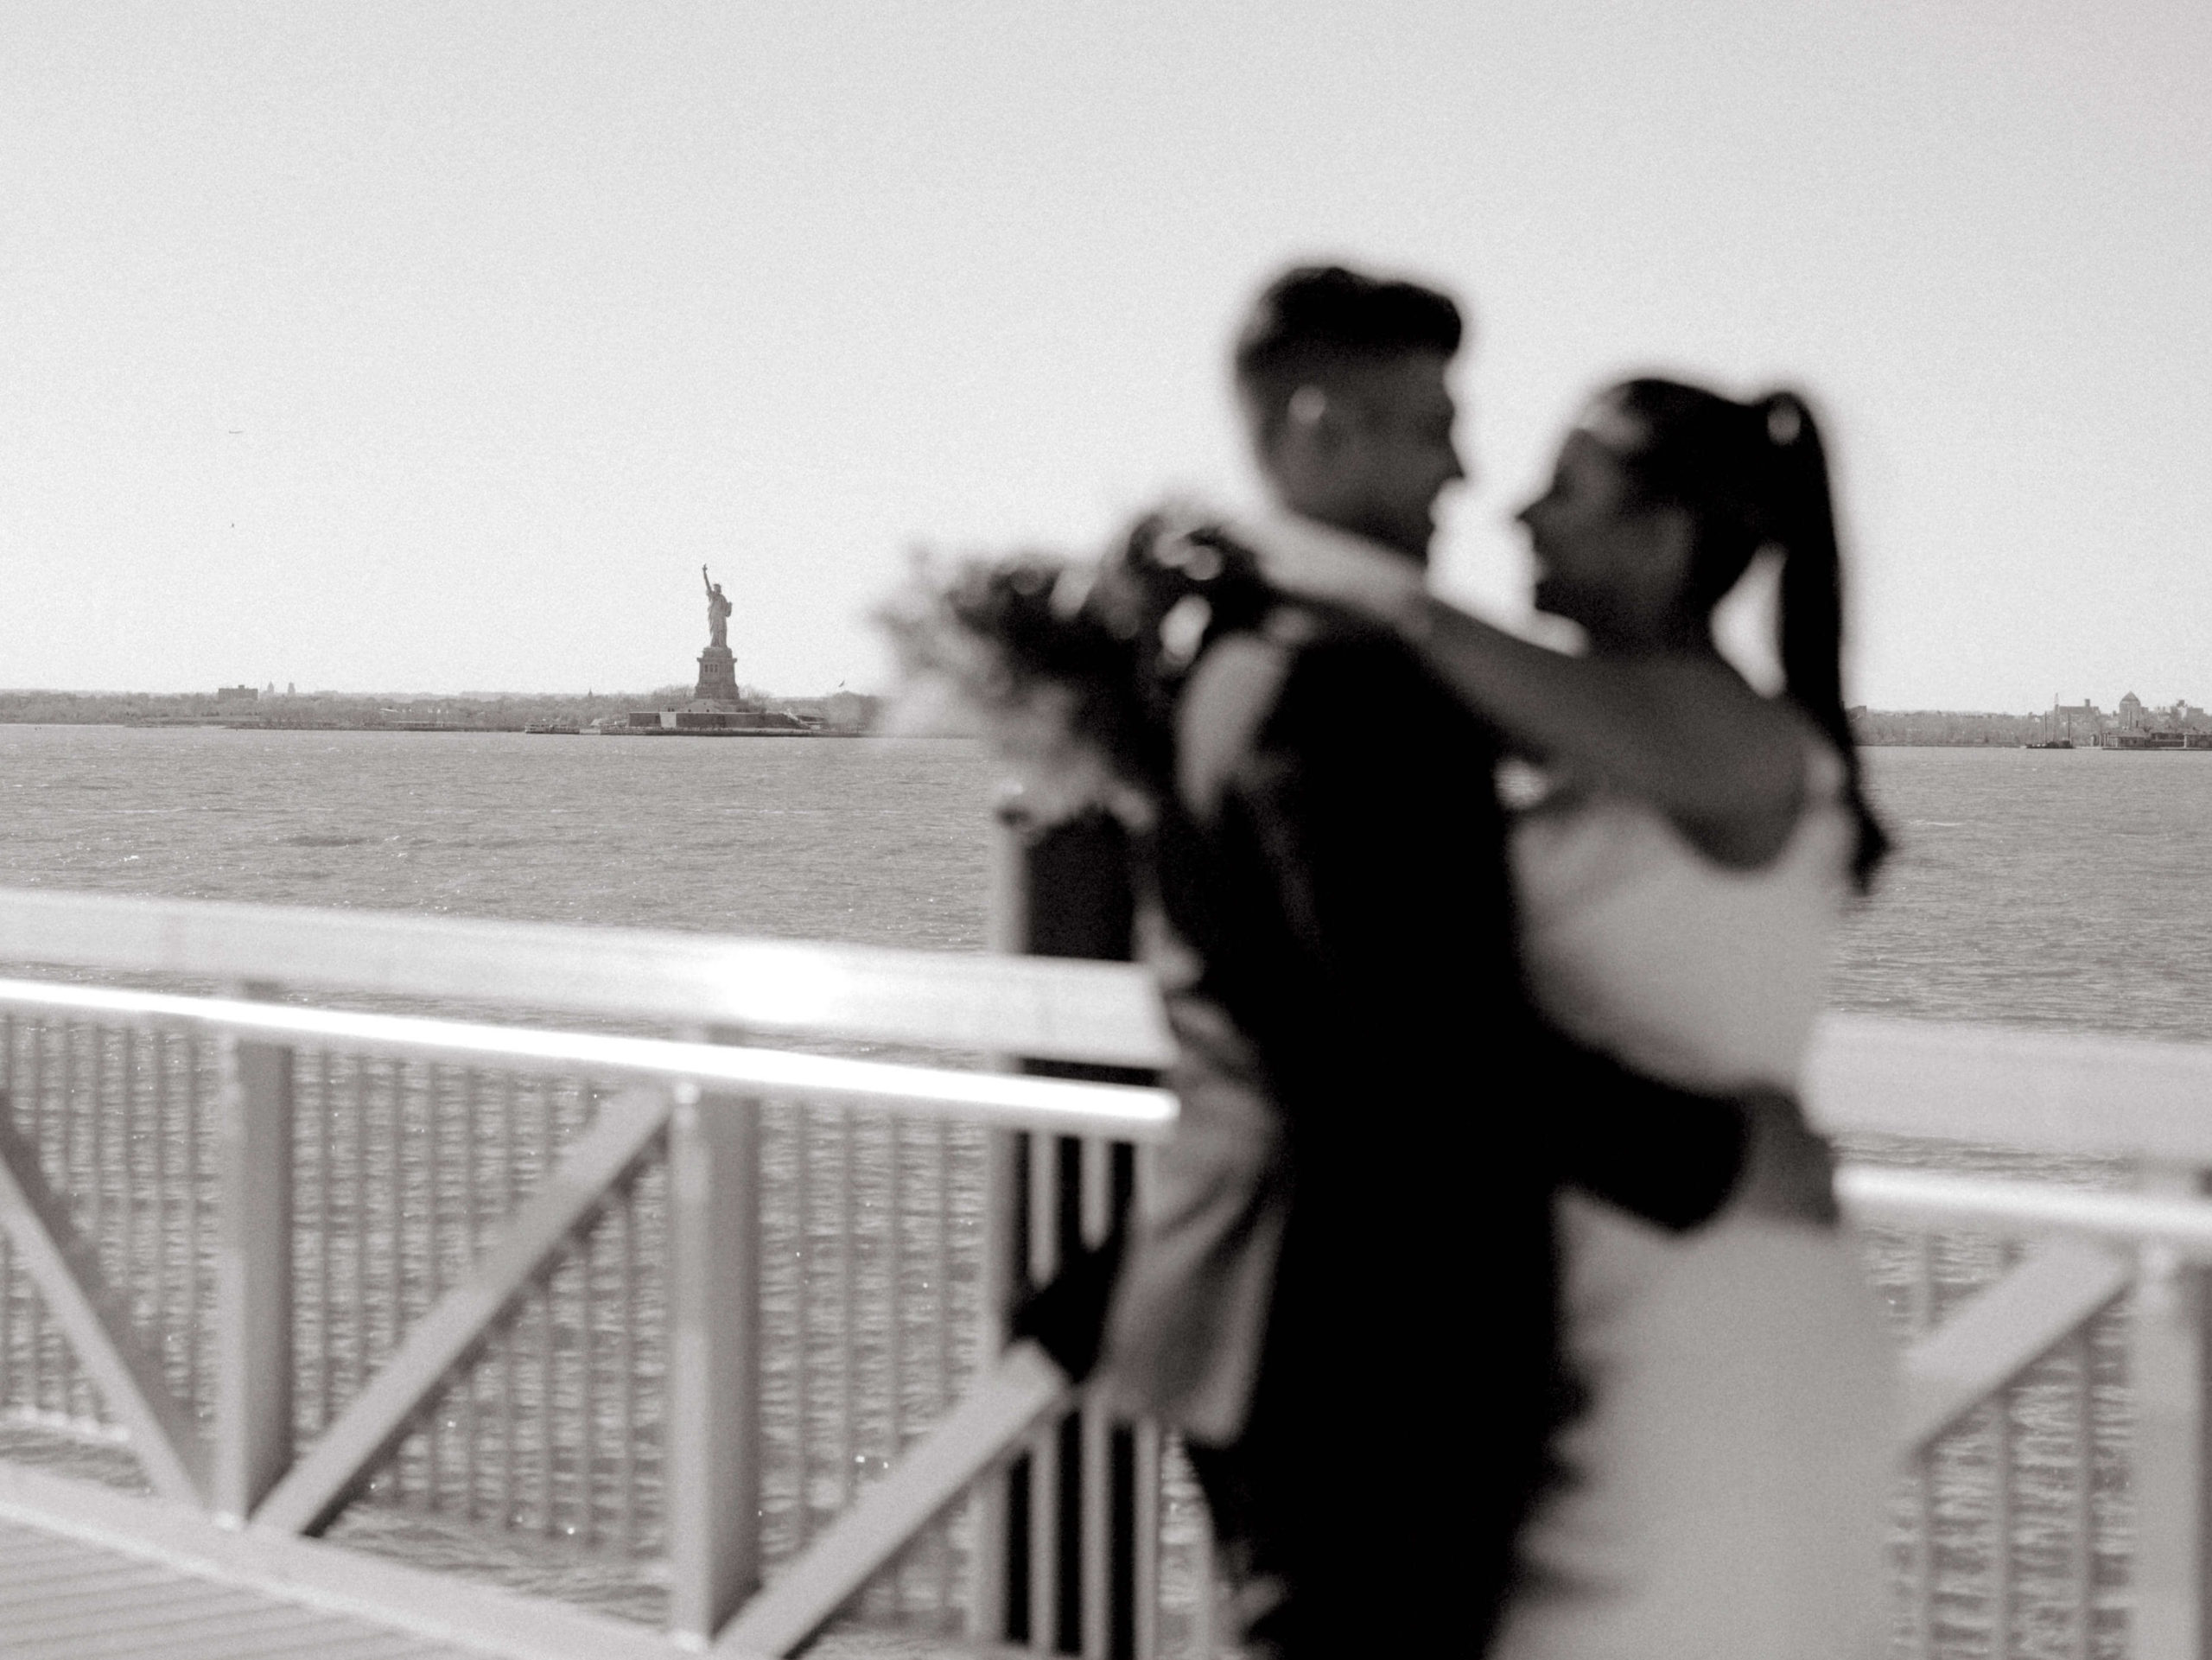 Editorial photo of the married couple hugging each other with the Statue of Liberty in the background. Image by Jenny Fu Studio